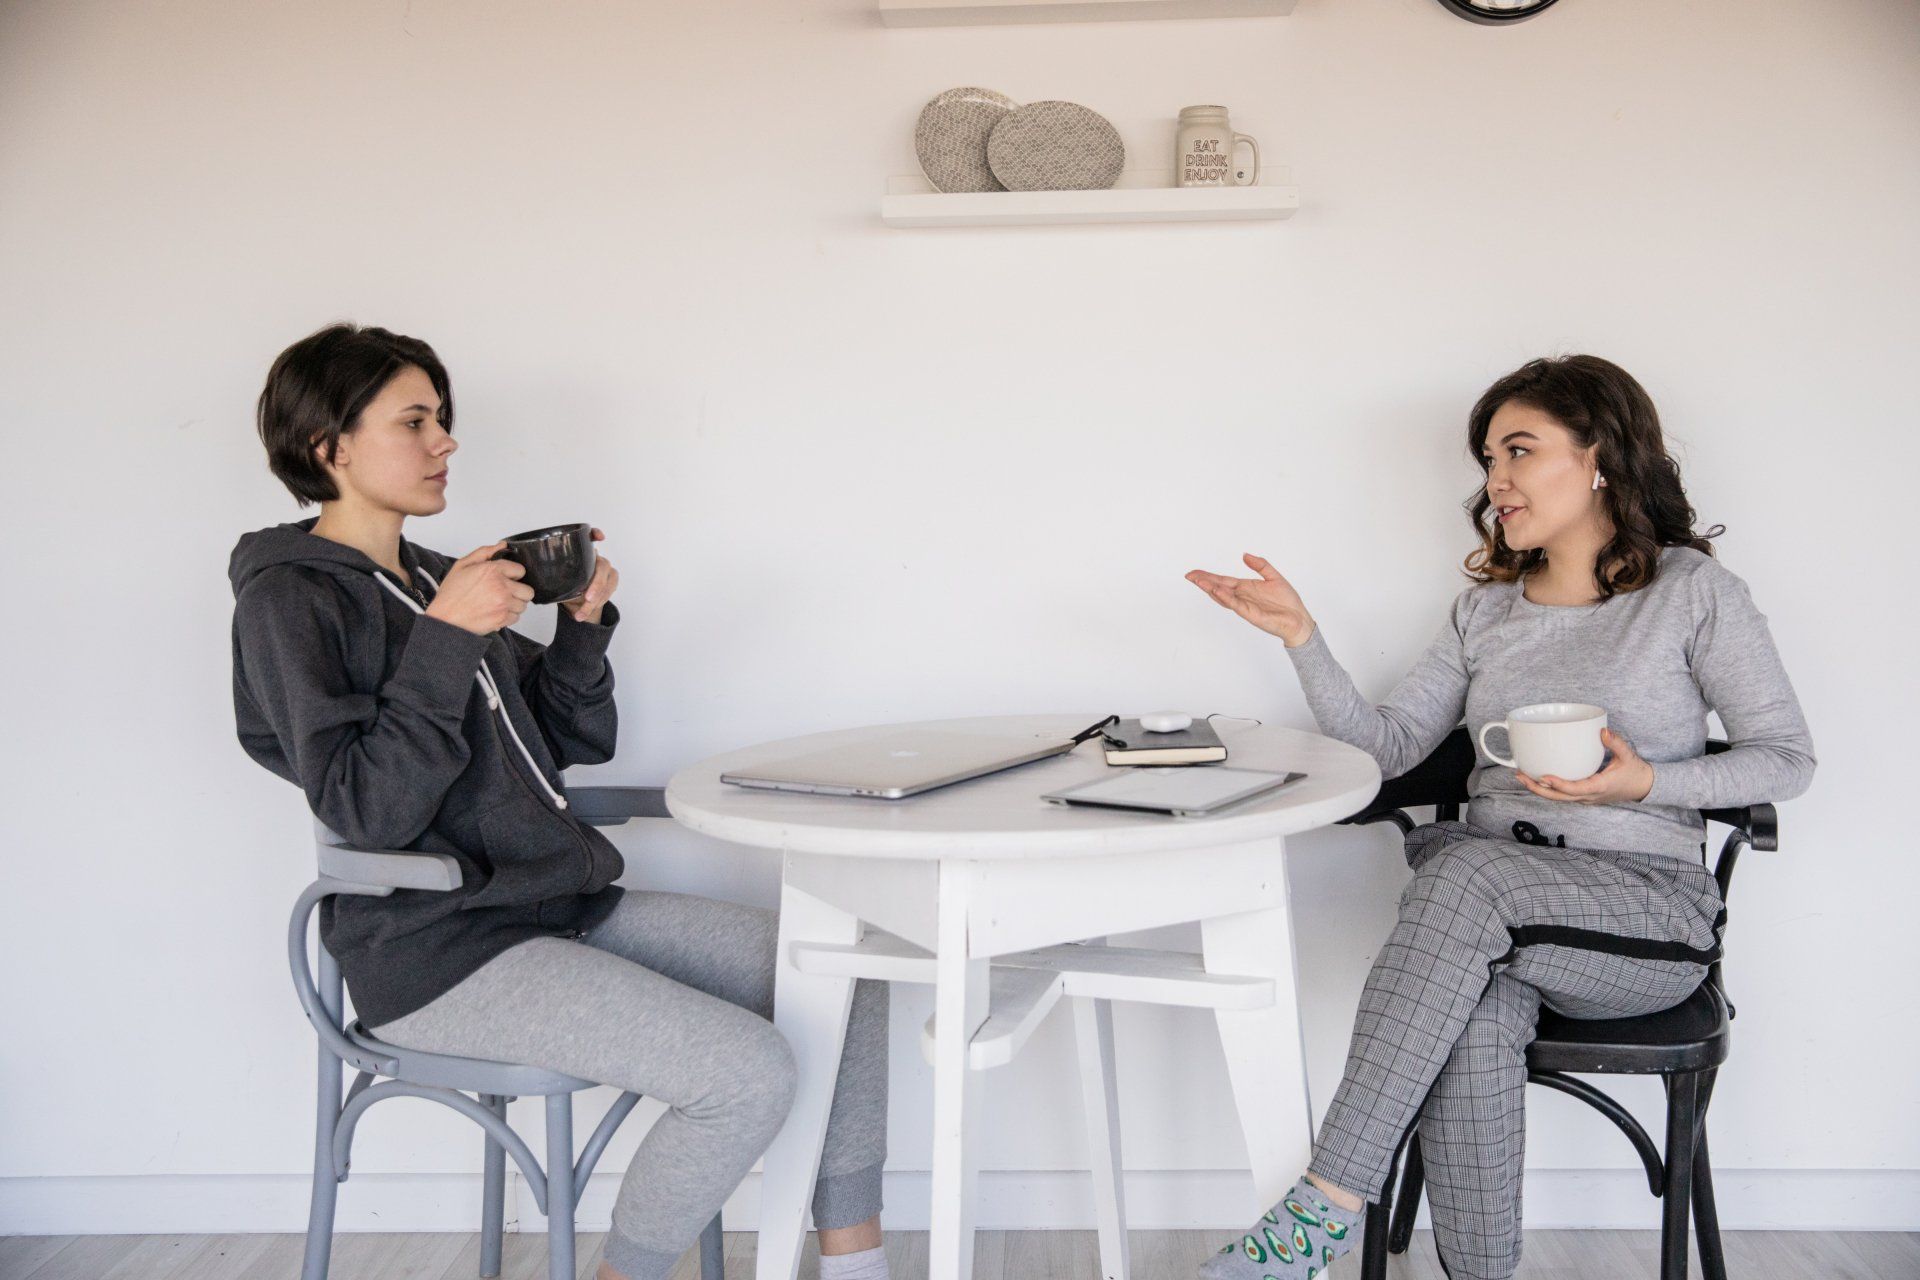 Two women sitting at a table talking and drinking coffee